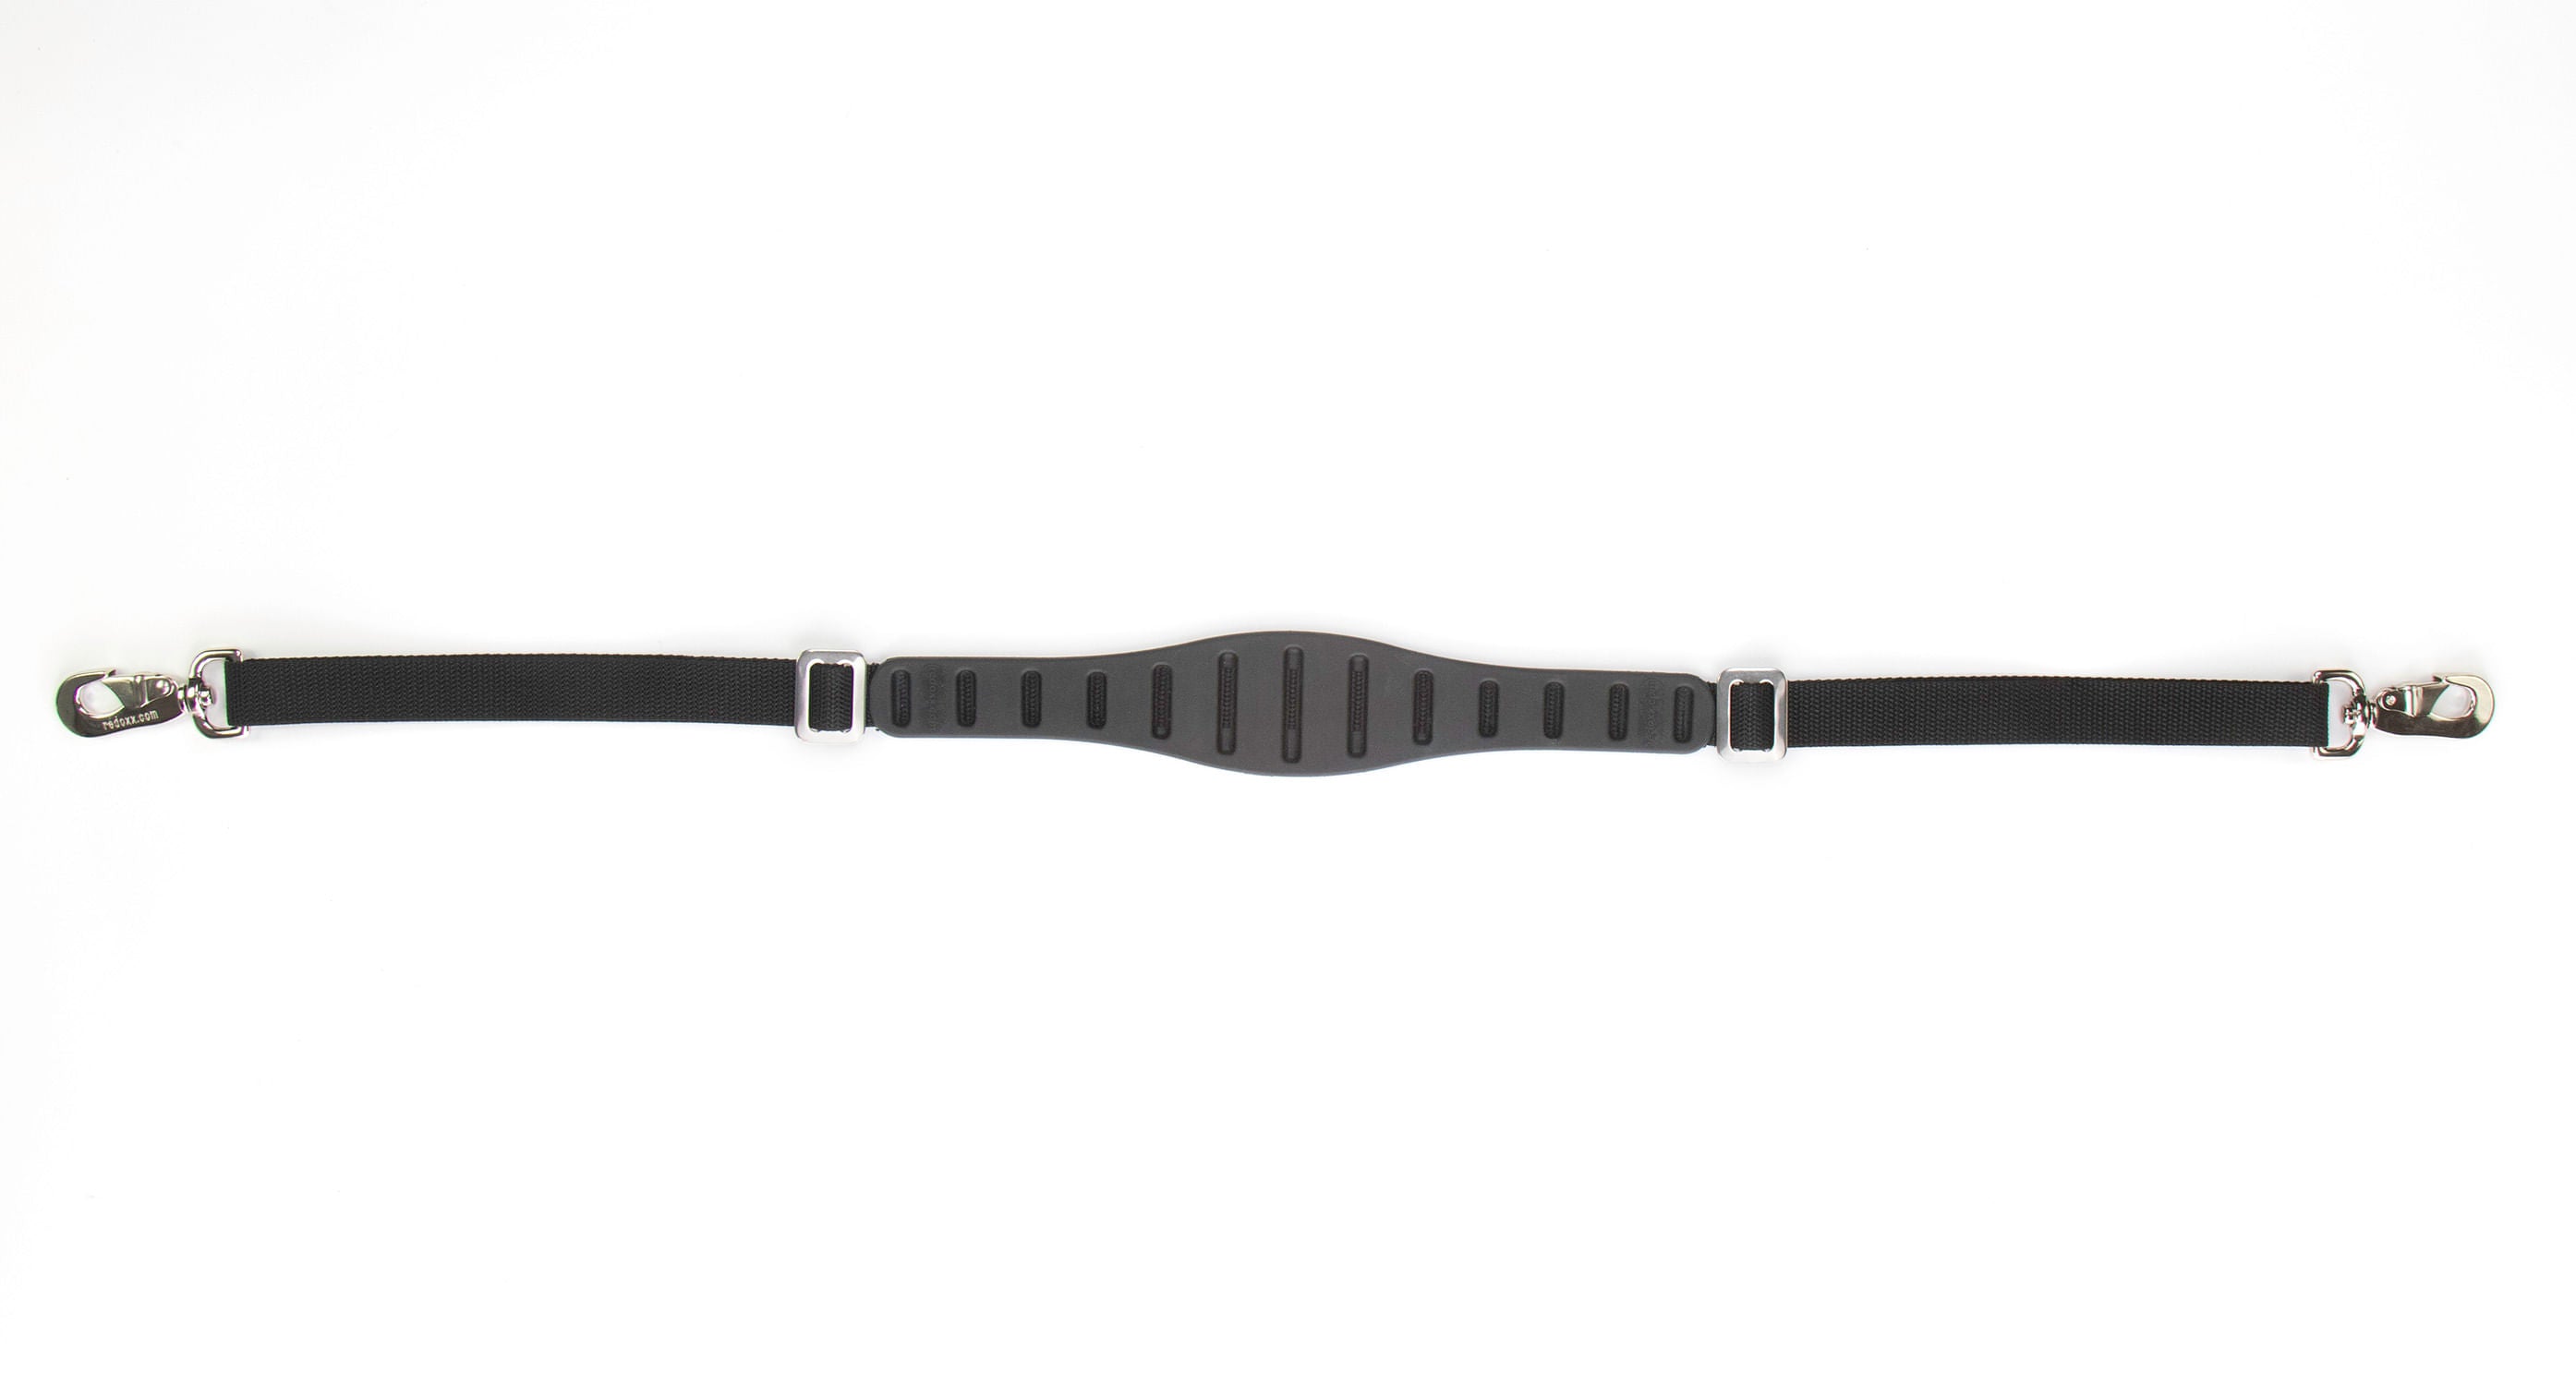 External Luggage Compression Strap by Red Oxx Mfg. Under $9.00.